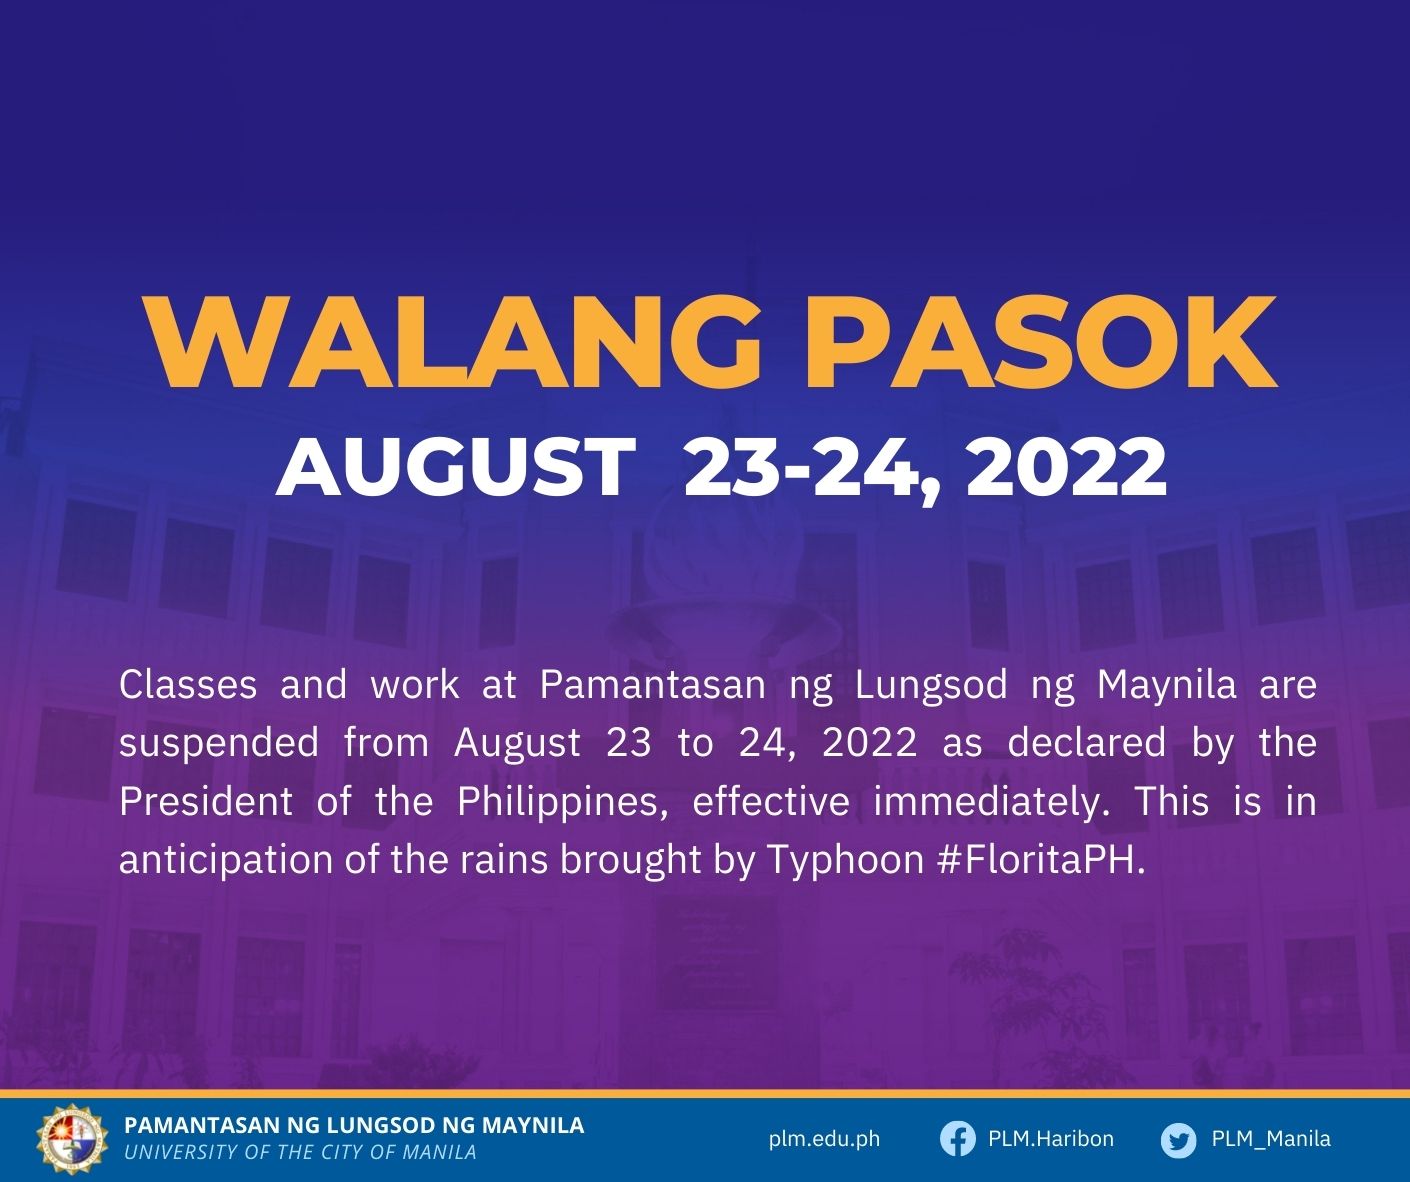 Classes, work suspended on August 23-24, 2022 